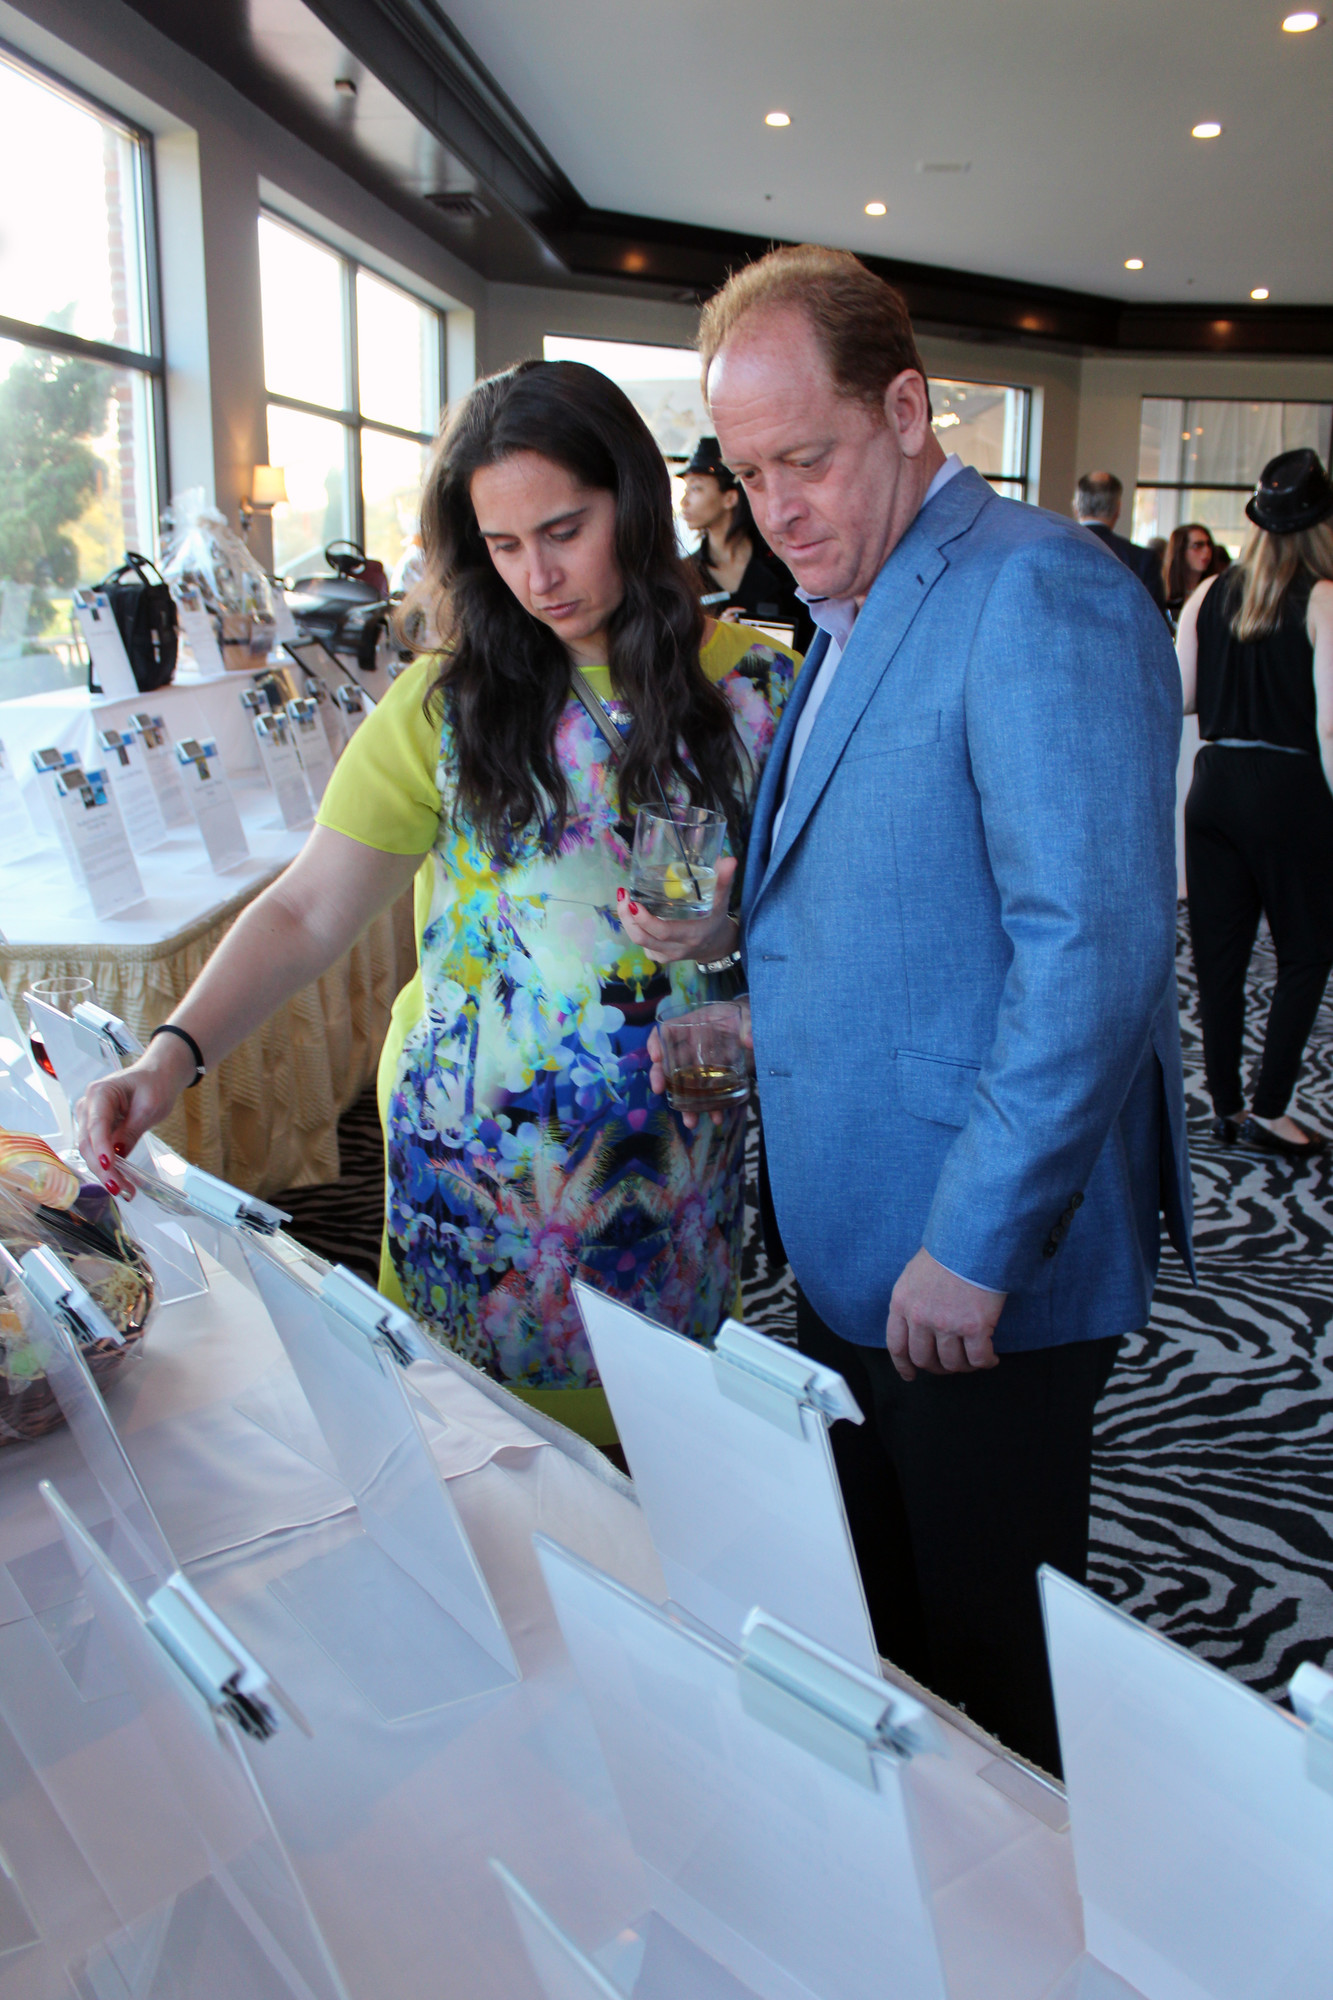 Melissa Gold and Greg Lobel viewed the items up for auction at the SIBSPlace event.